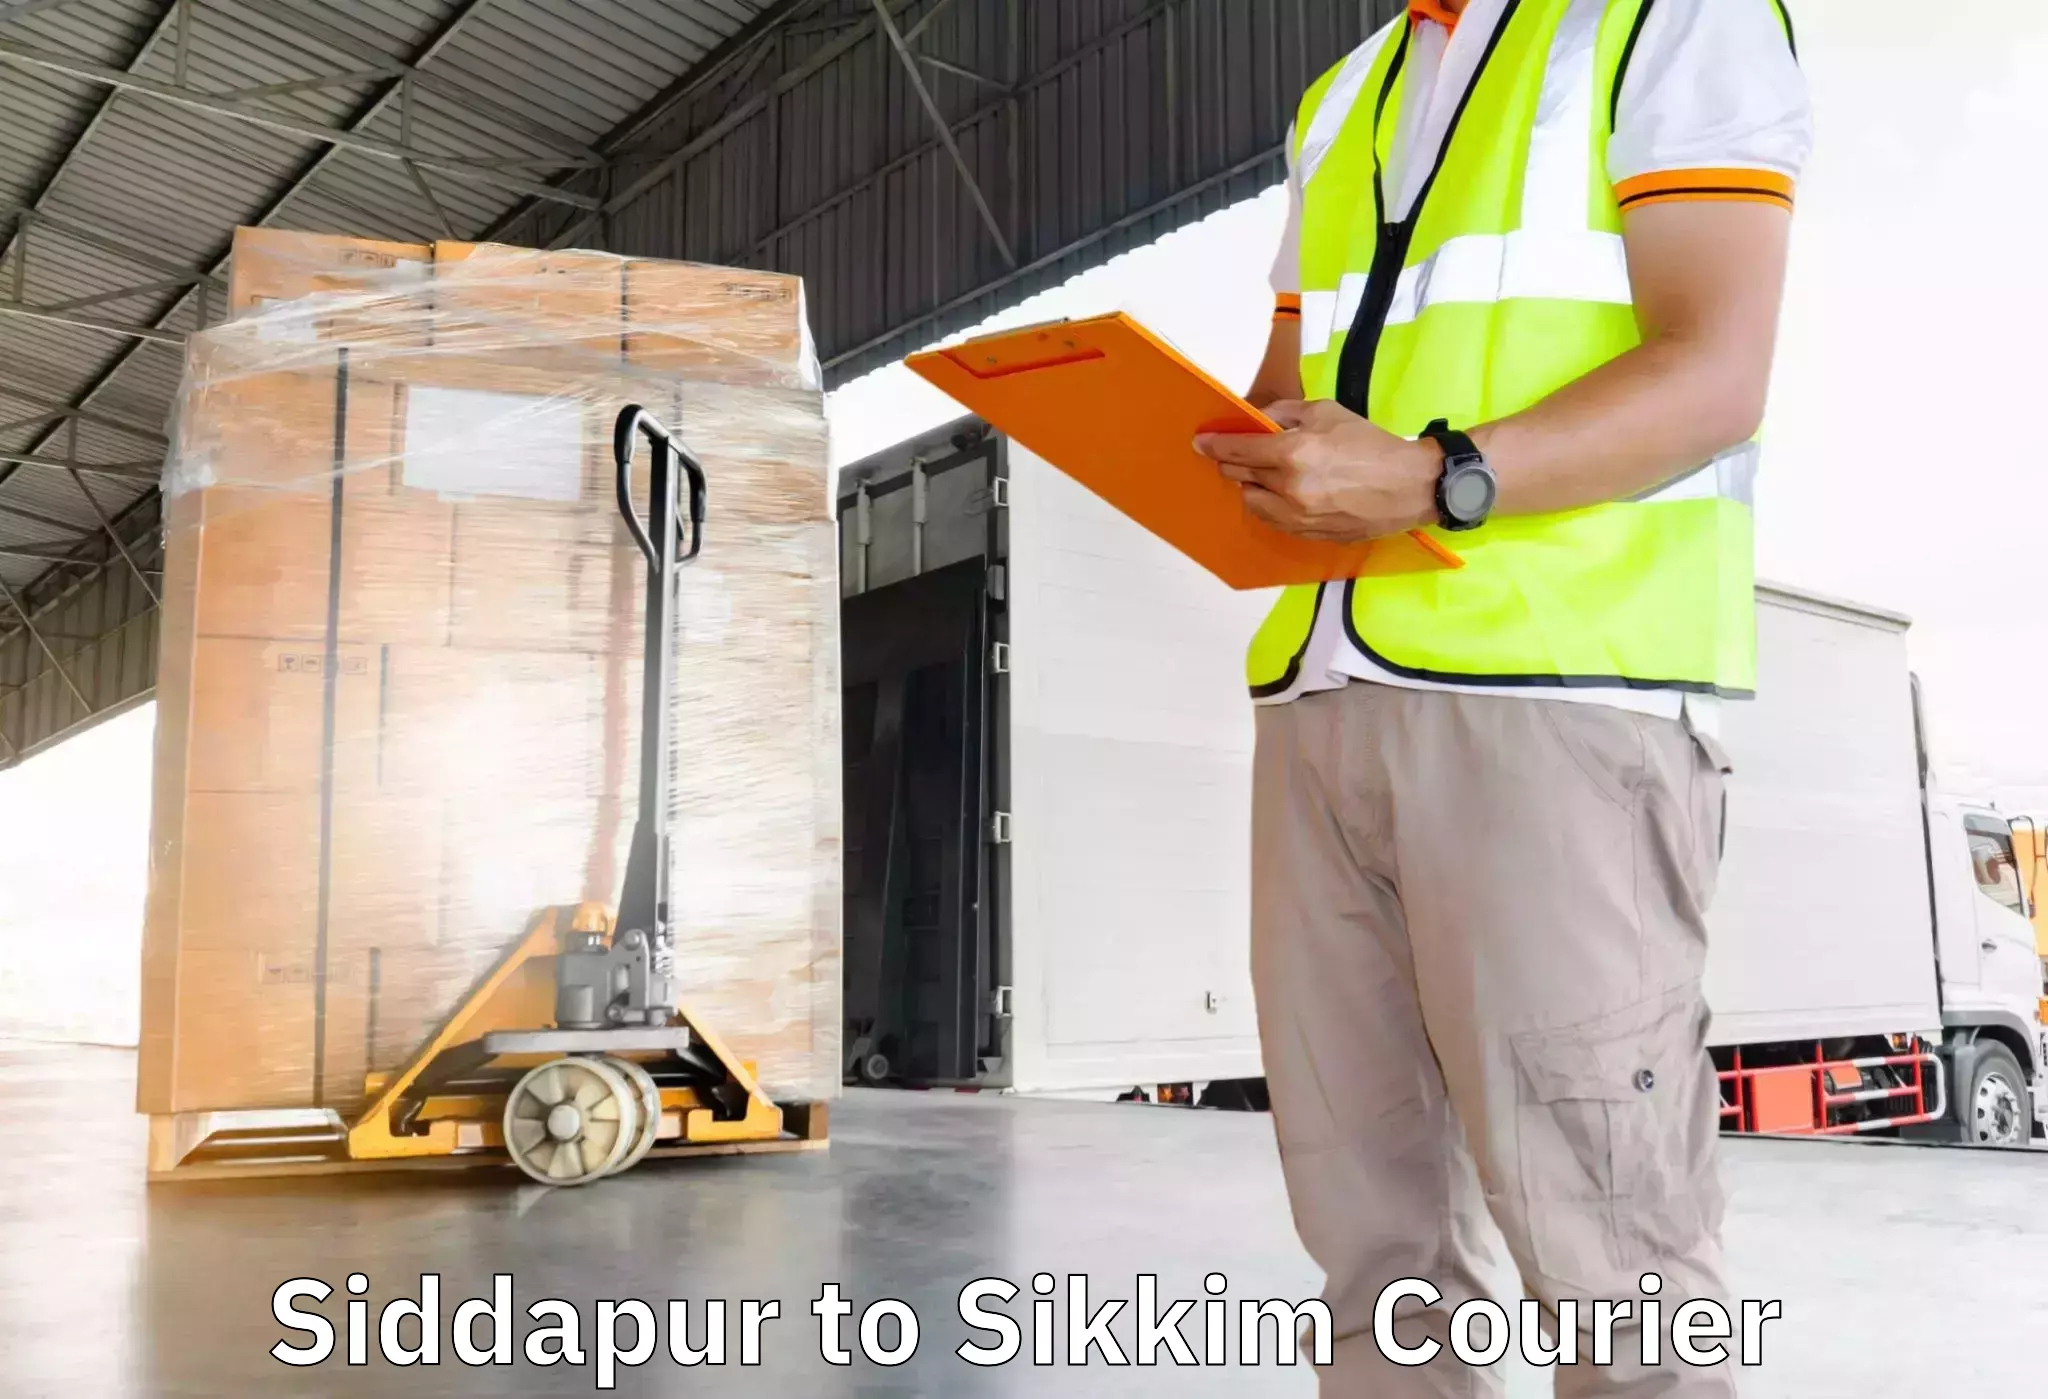 Furniture transport company Siddapur to East Sikkim